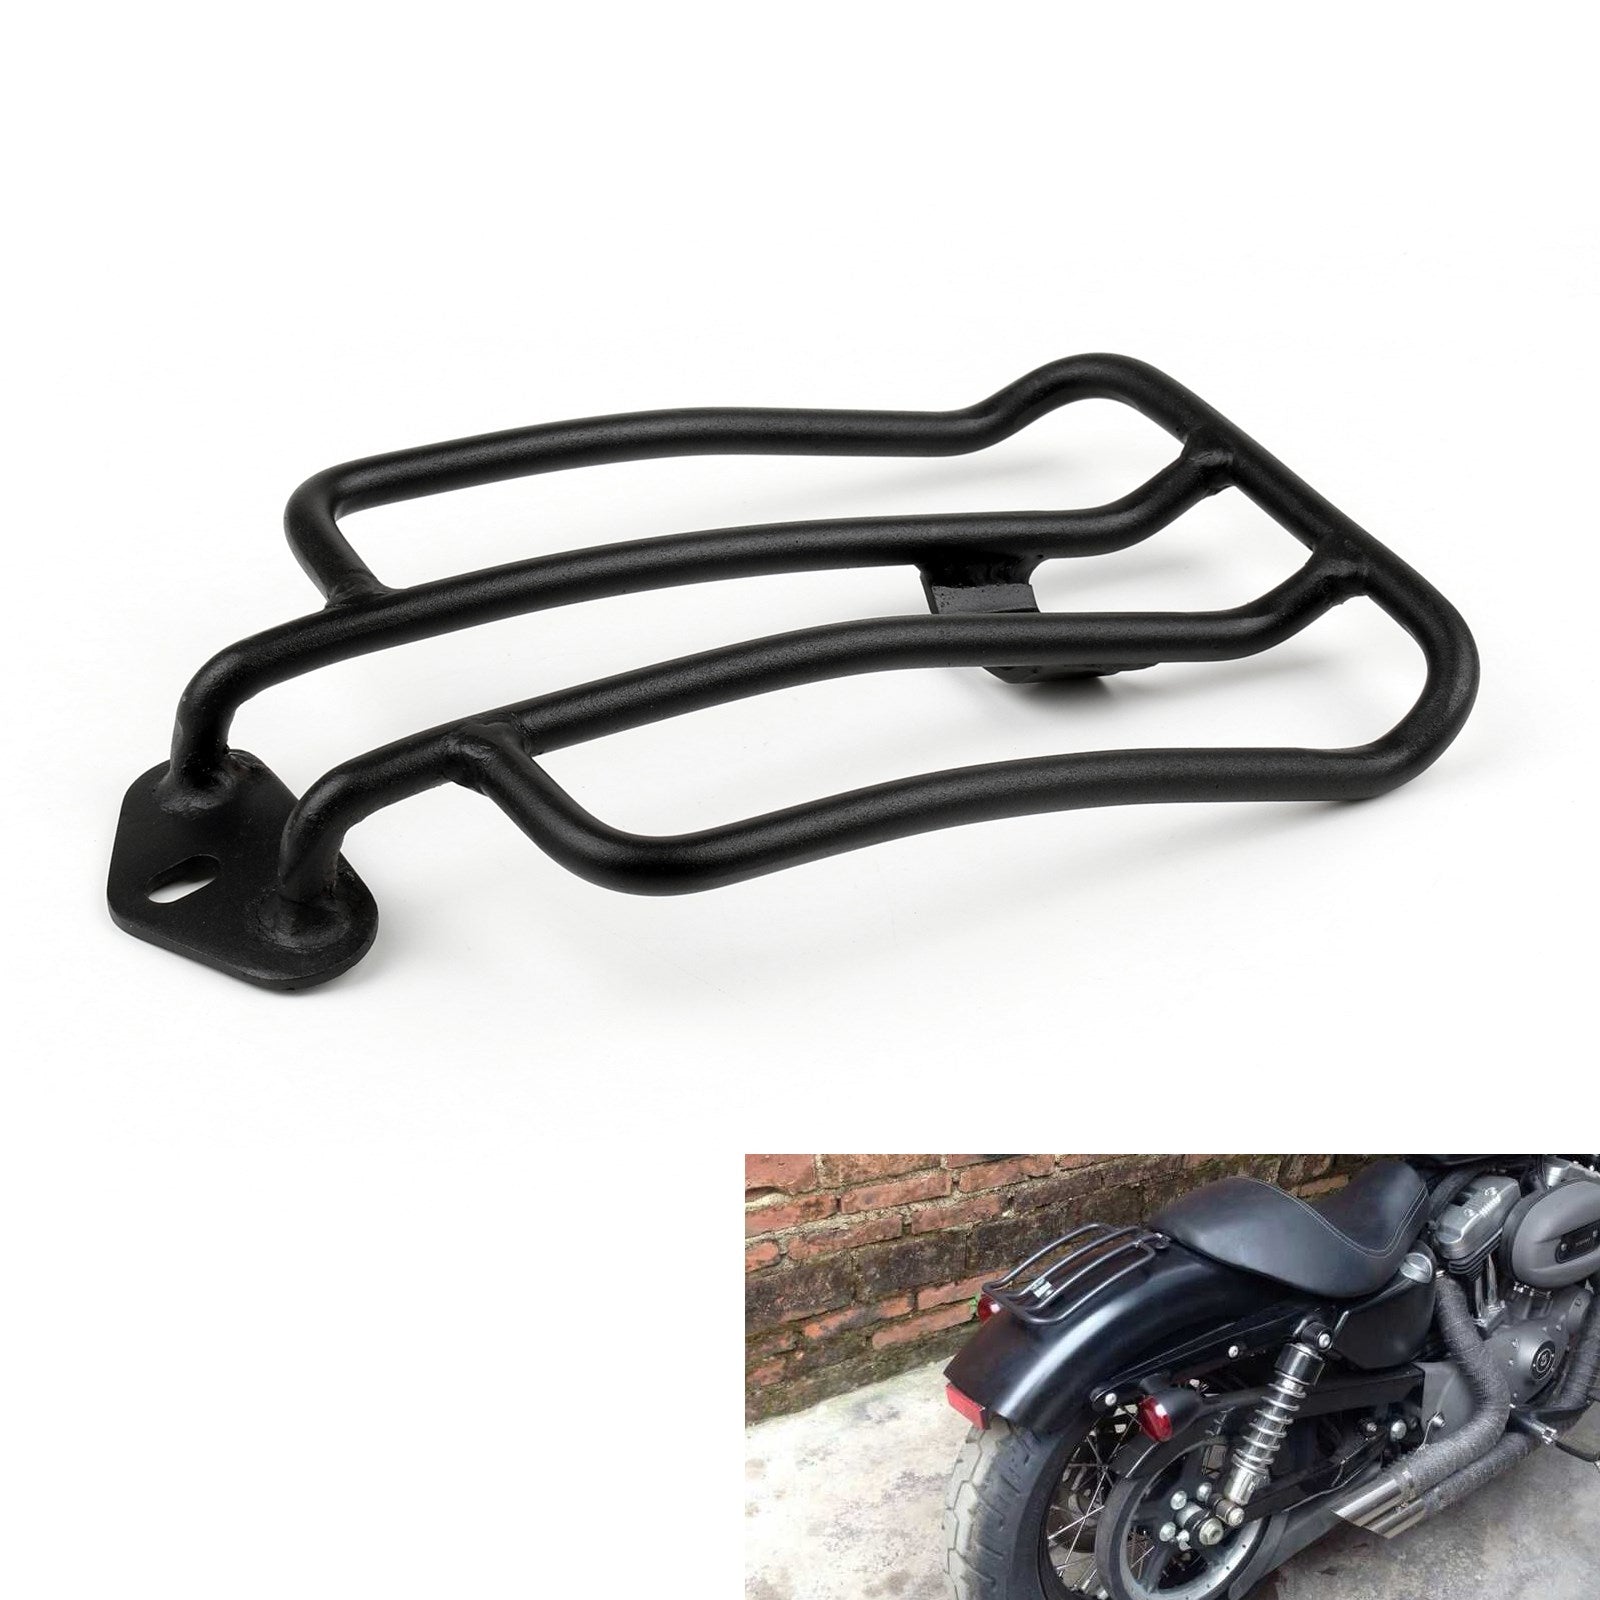 BLK Luggage Rack XL883 2004-2015 Sportster Solo 2008 1200 Seat UY Fit